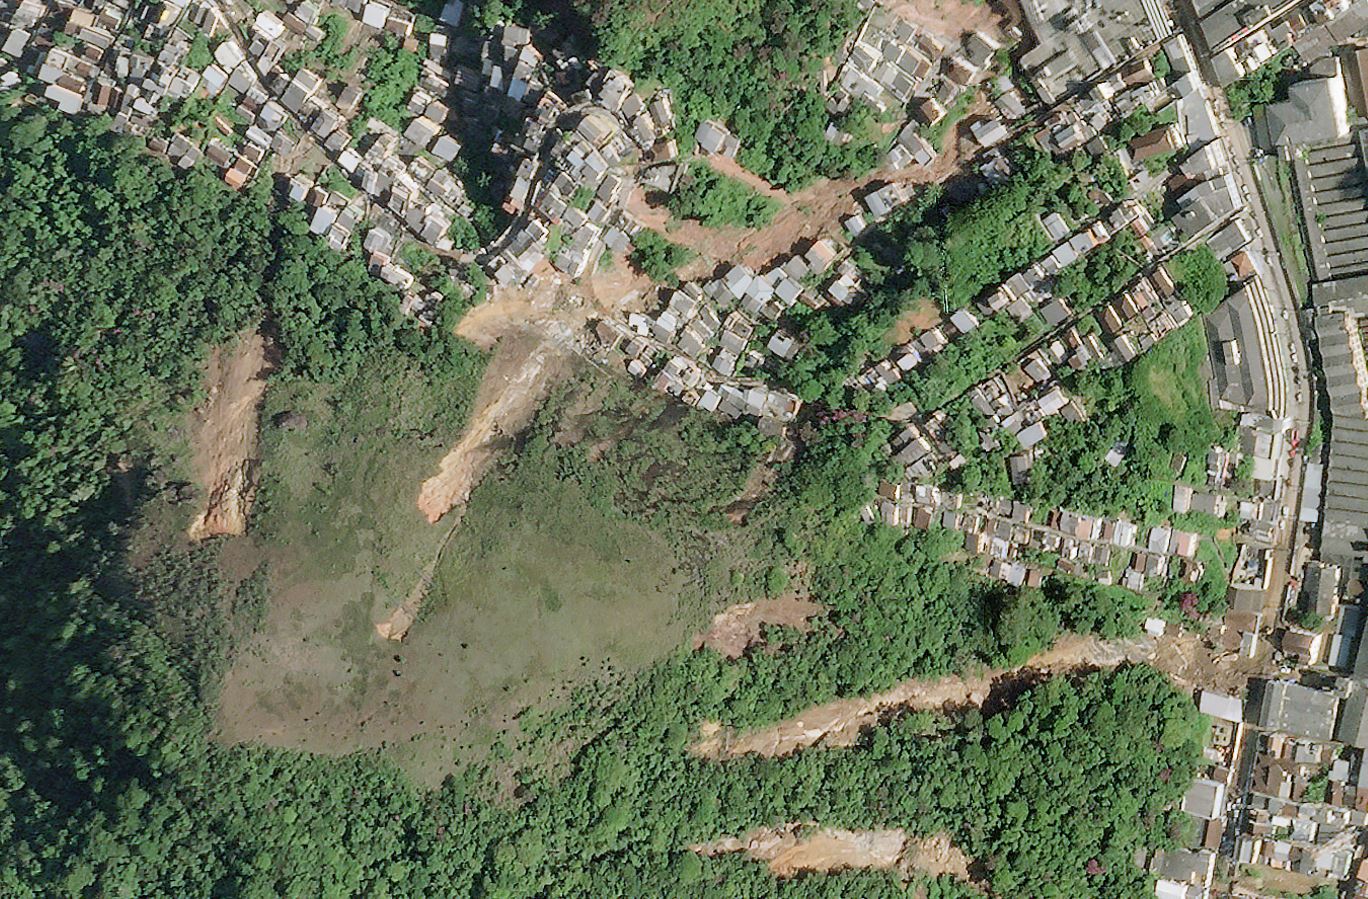 High resolution satellite image of the urban landslides in the north of the city of Petrópolis in Brazil.